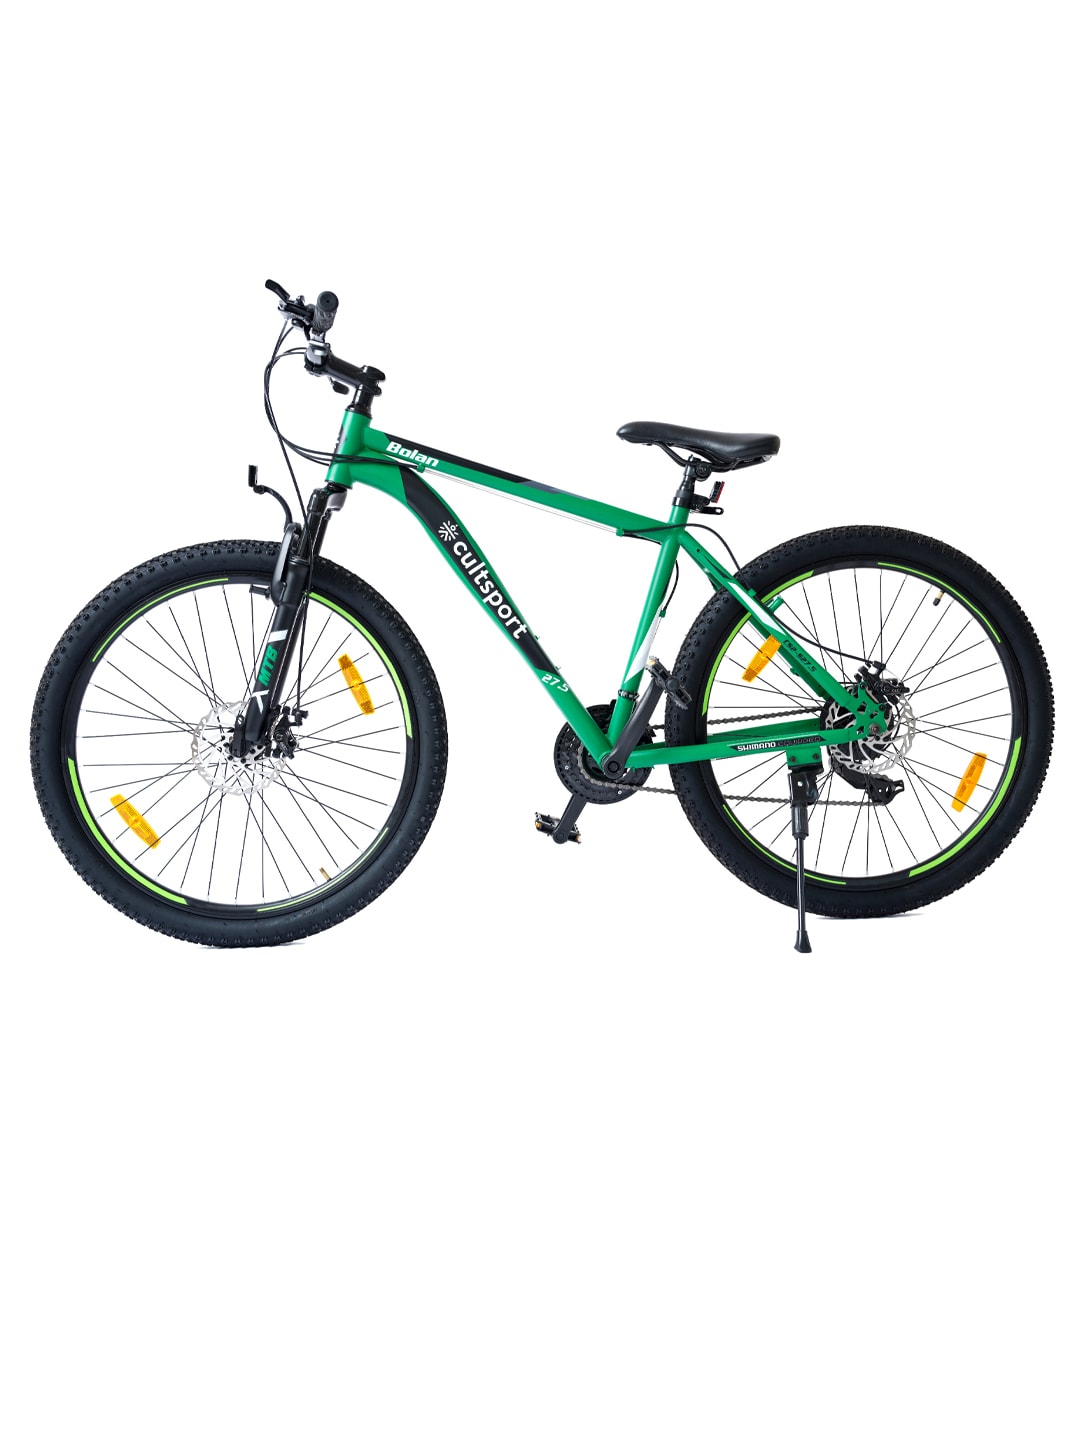 Buy Geared Cycle Online Wide range of Outdoor Cycles and Mountain Cycles Cultsport